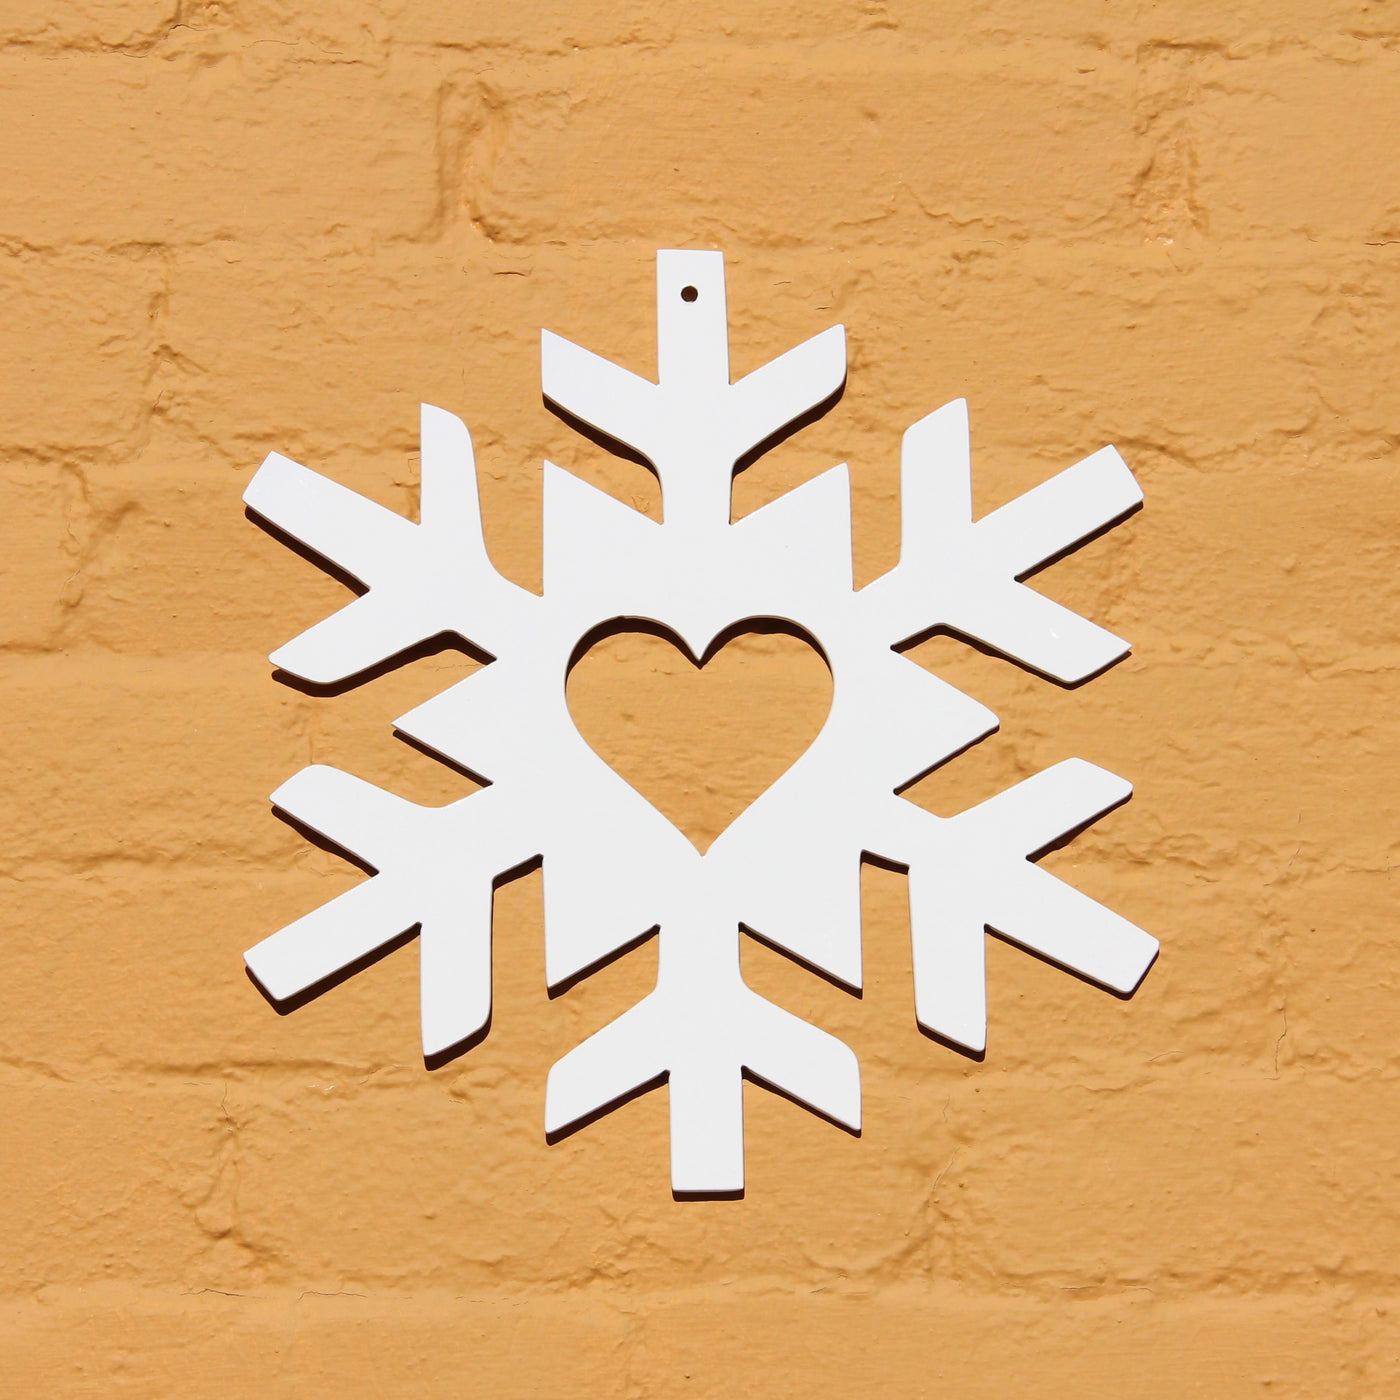 Snowflake, Winter Decor, Christmas Decor - Madison Iron and Wood - Wall Art - metal outdoor decor - Steel deocrations - american made products - veteran owned business products - fencing decorations - fencing supplies - custom wall decorations - personalized wall signs - steel - decorative post caps - steel post caps - metal post caps - brackets - structural brackets - home improvement - easter - easter decorations - easter gift - easter yard decor